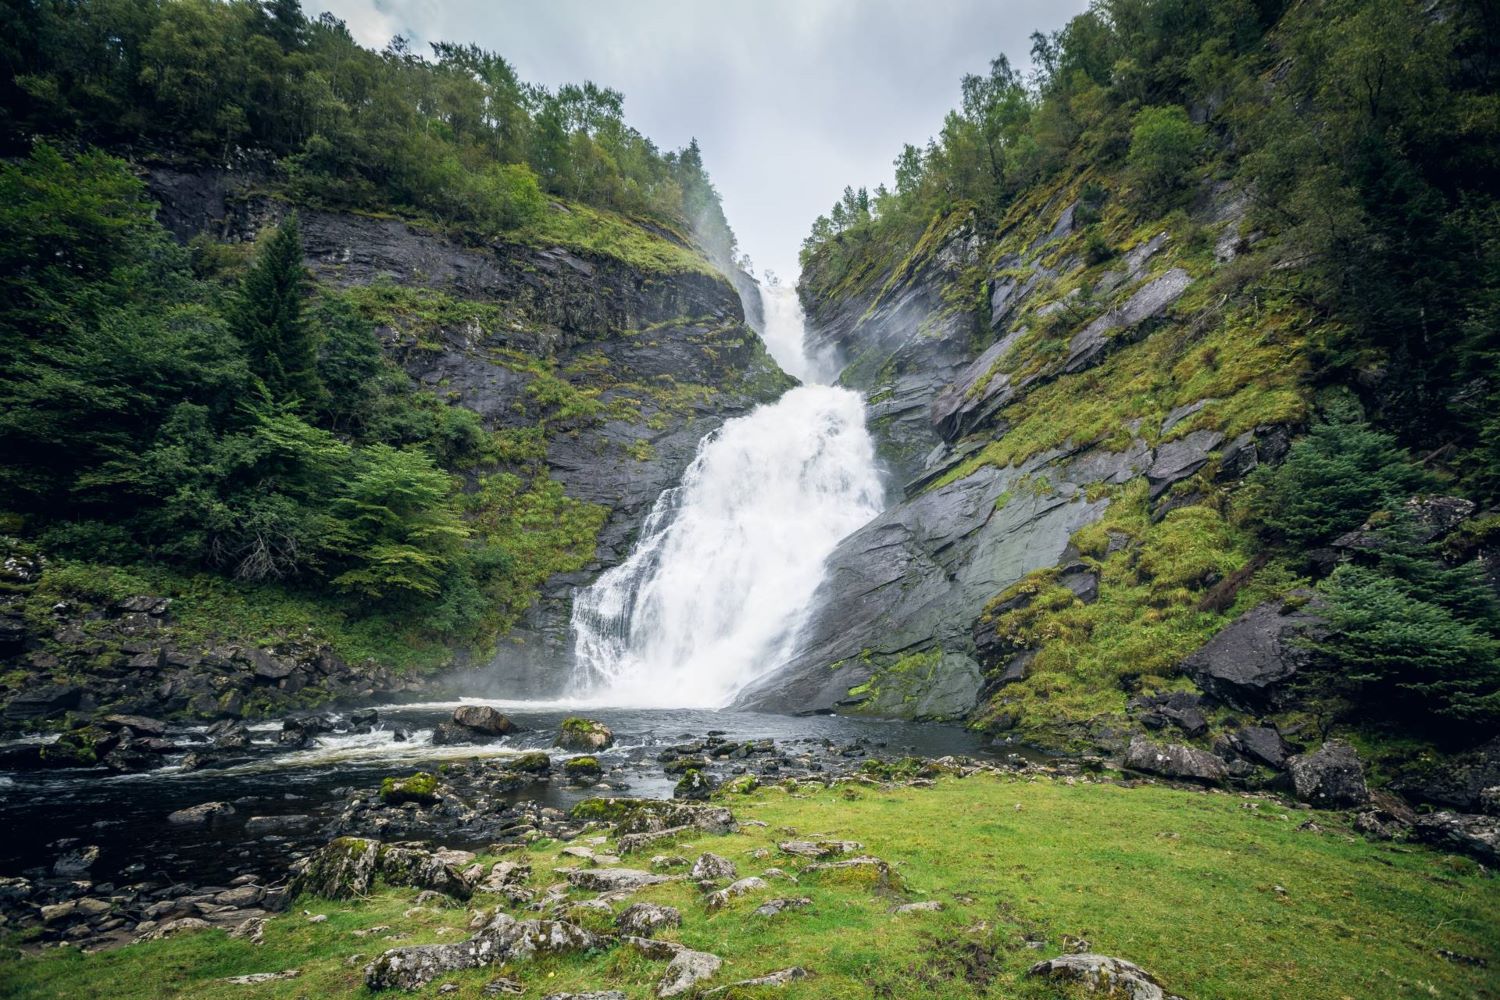 Driving from Aalesund to Bergen via Sognefjellet - Hulde waterfall